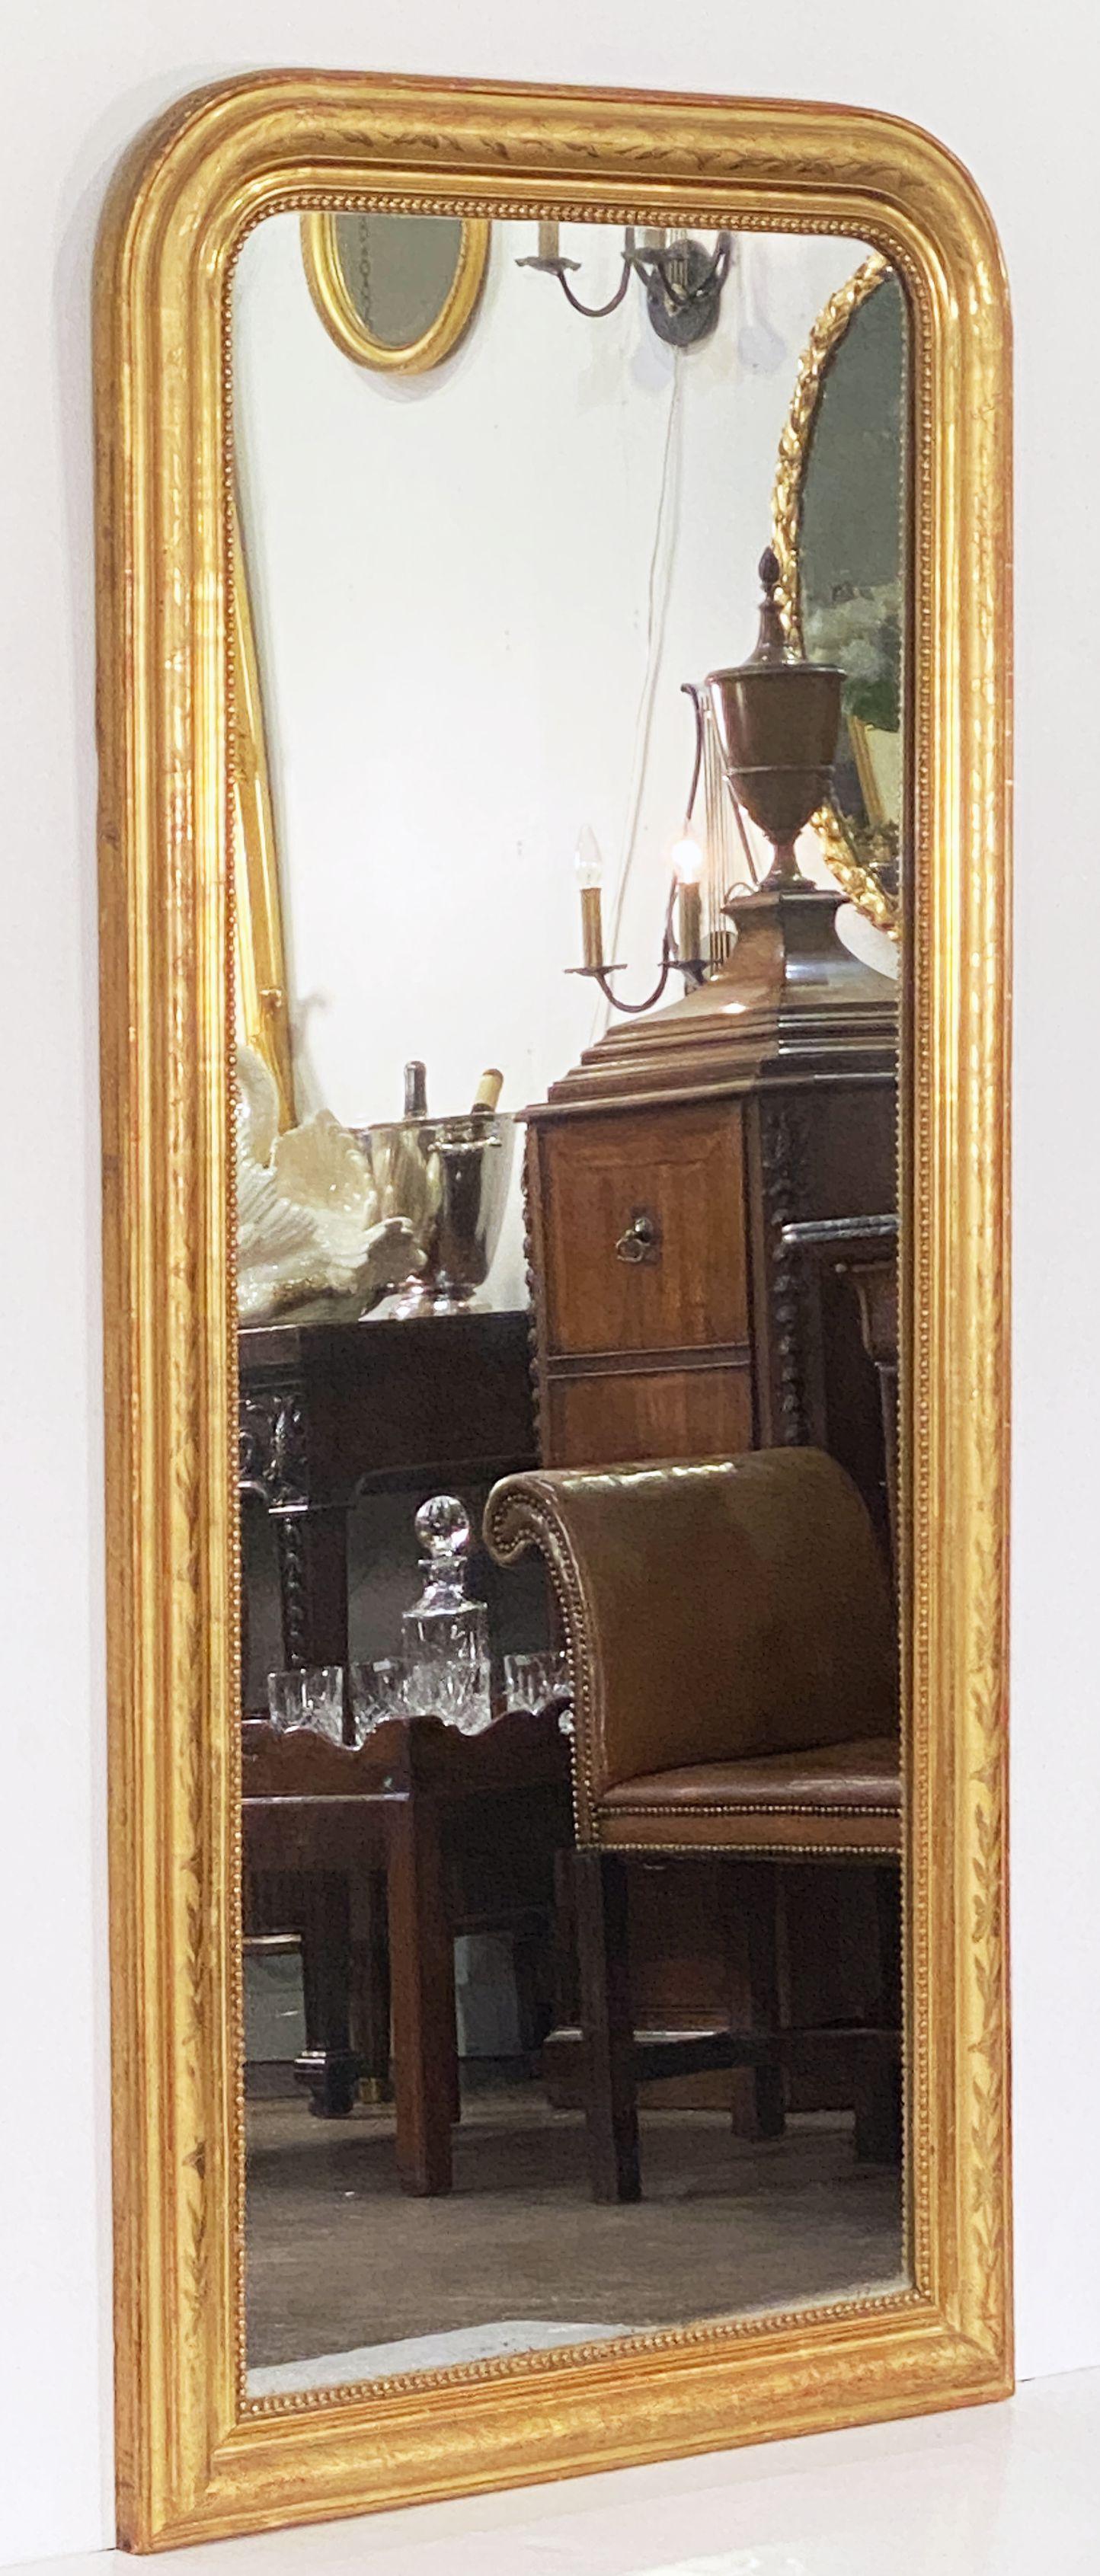 A fine tall Louis Philippe wall or dressing console mirror from France, featuring a moulded surround with a beautiful patinated gold-leaf - the outer border with a narrow rope twist design and, to the inner frame, a border of interlocking flowers